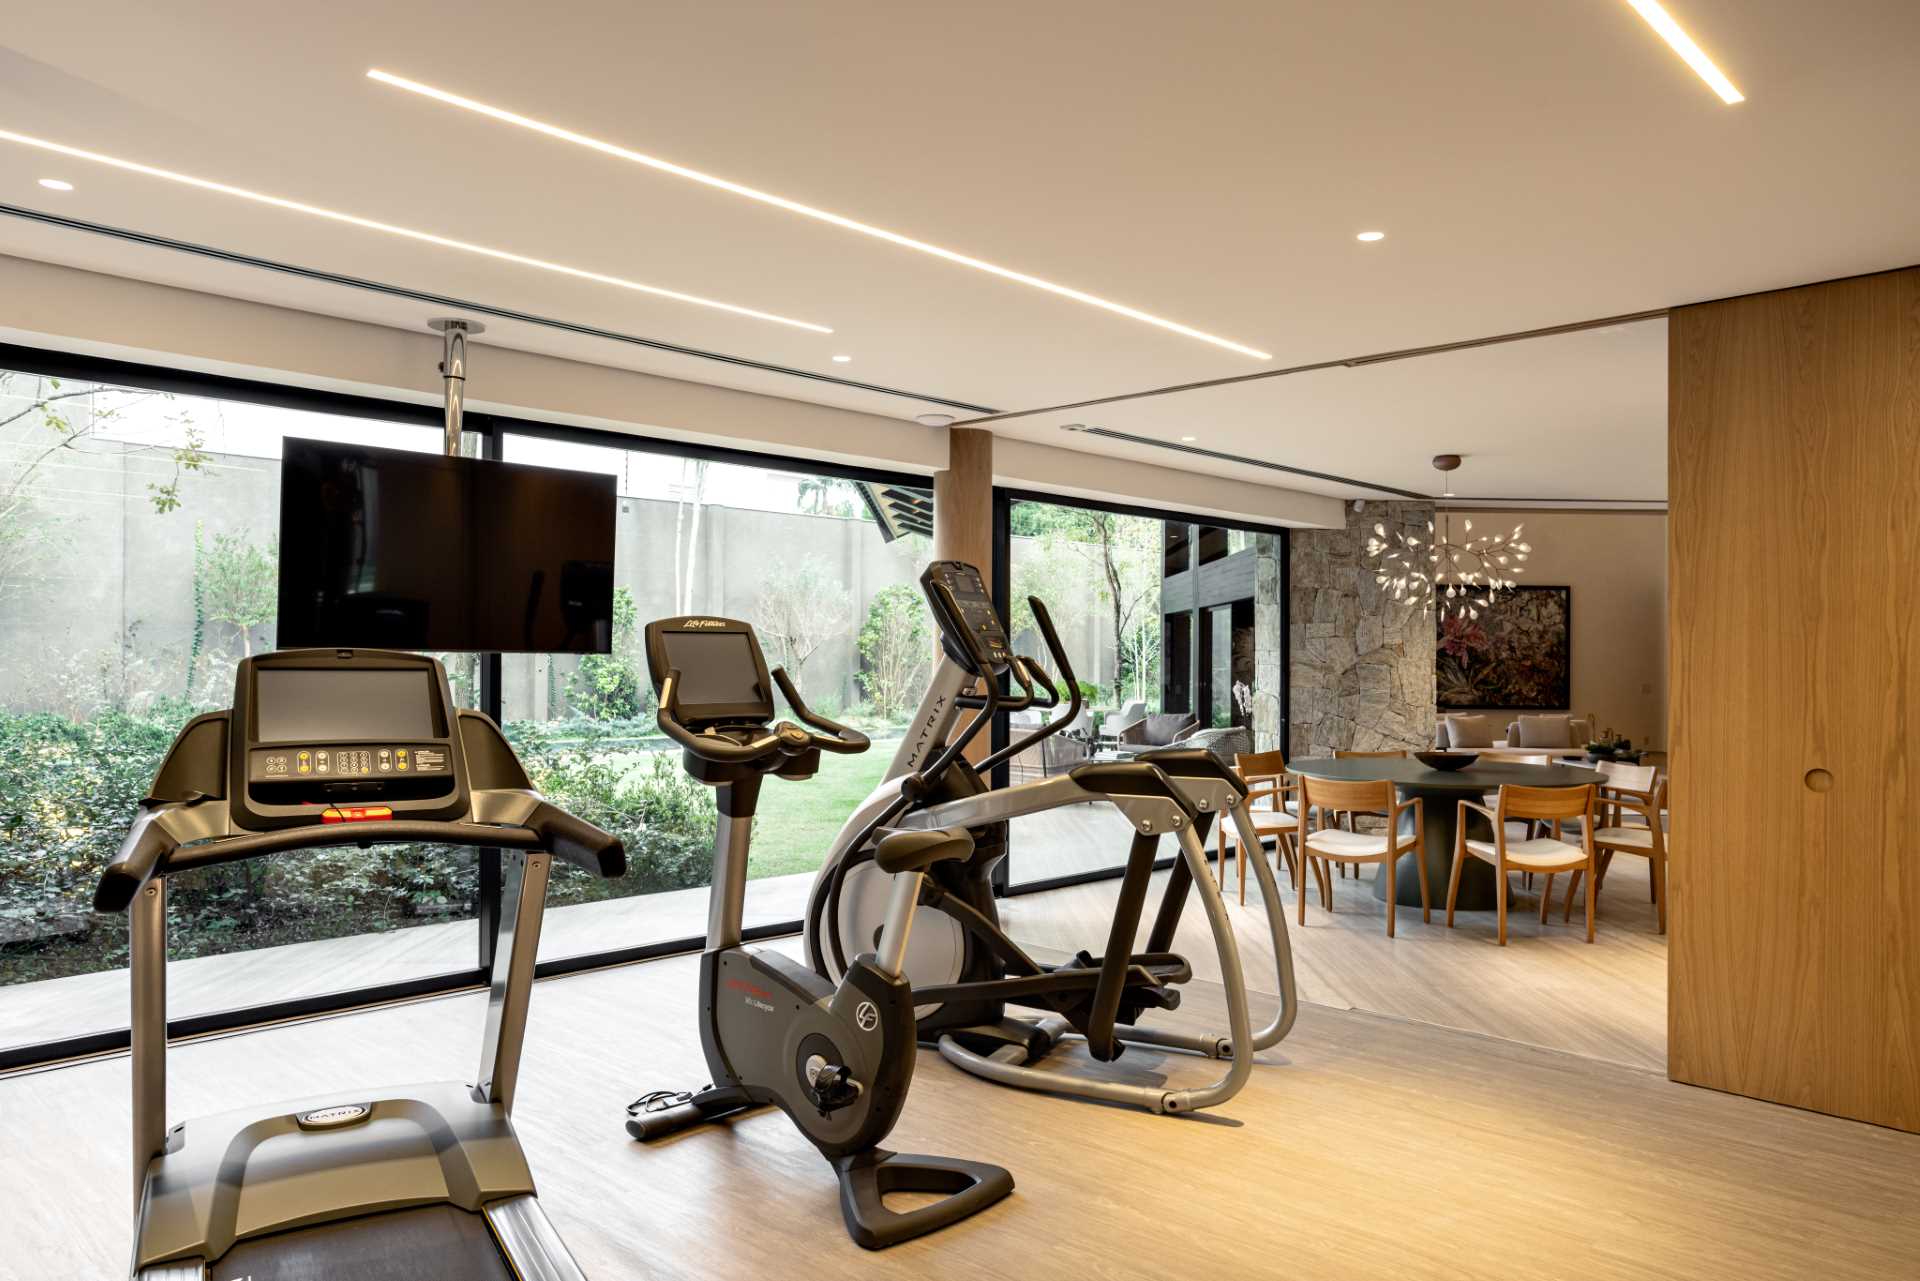 A modern home gym that can hidden from view via a sliding wood wall.